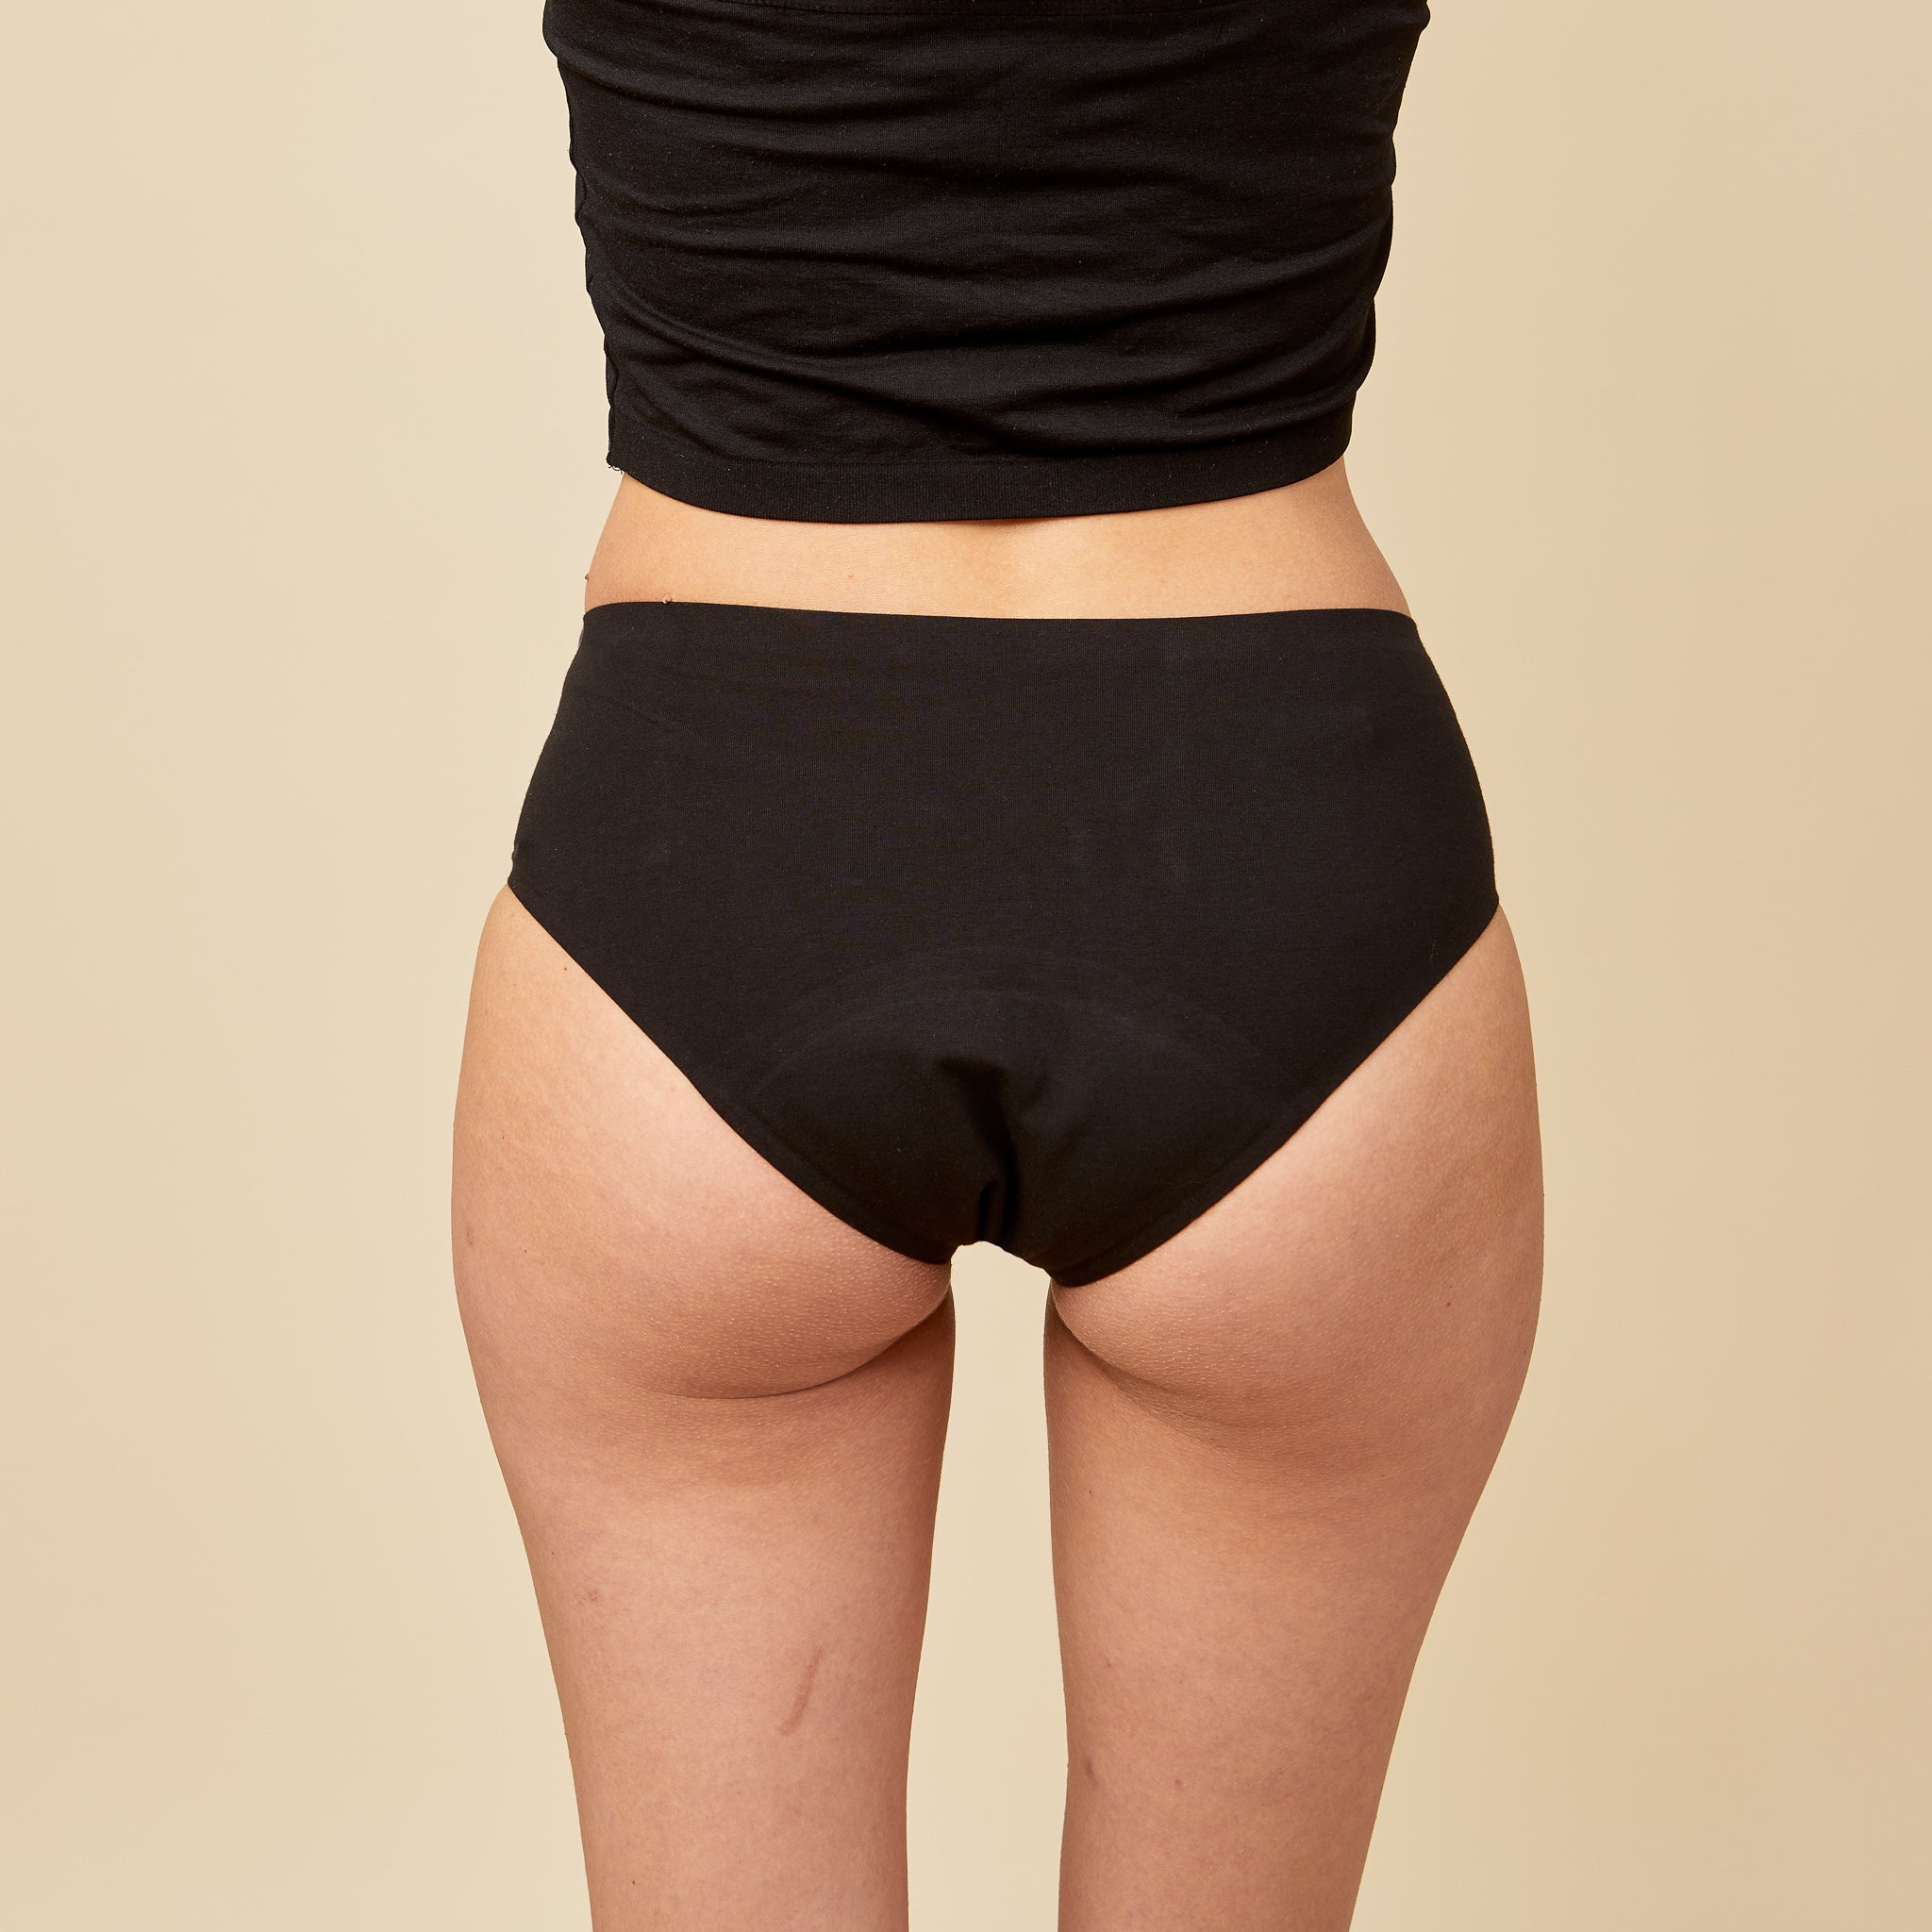 dais period underwear in hipster cut in black shown on model from the black.